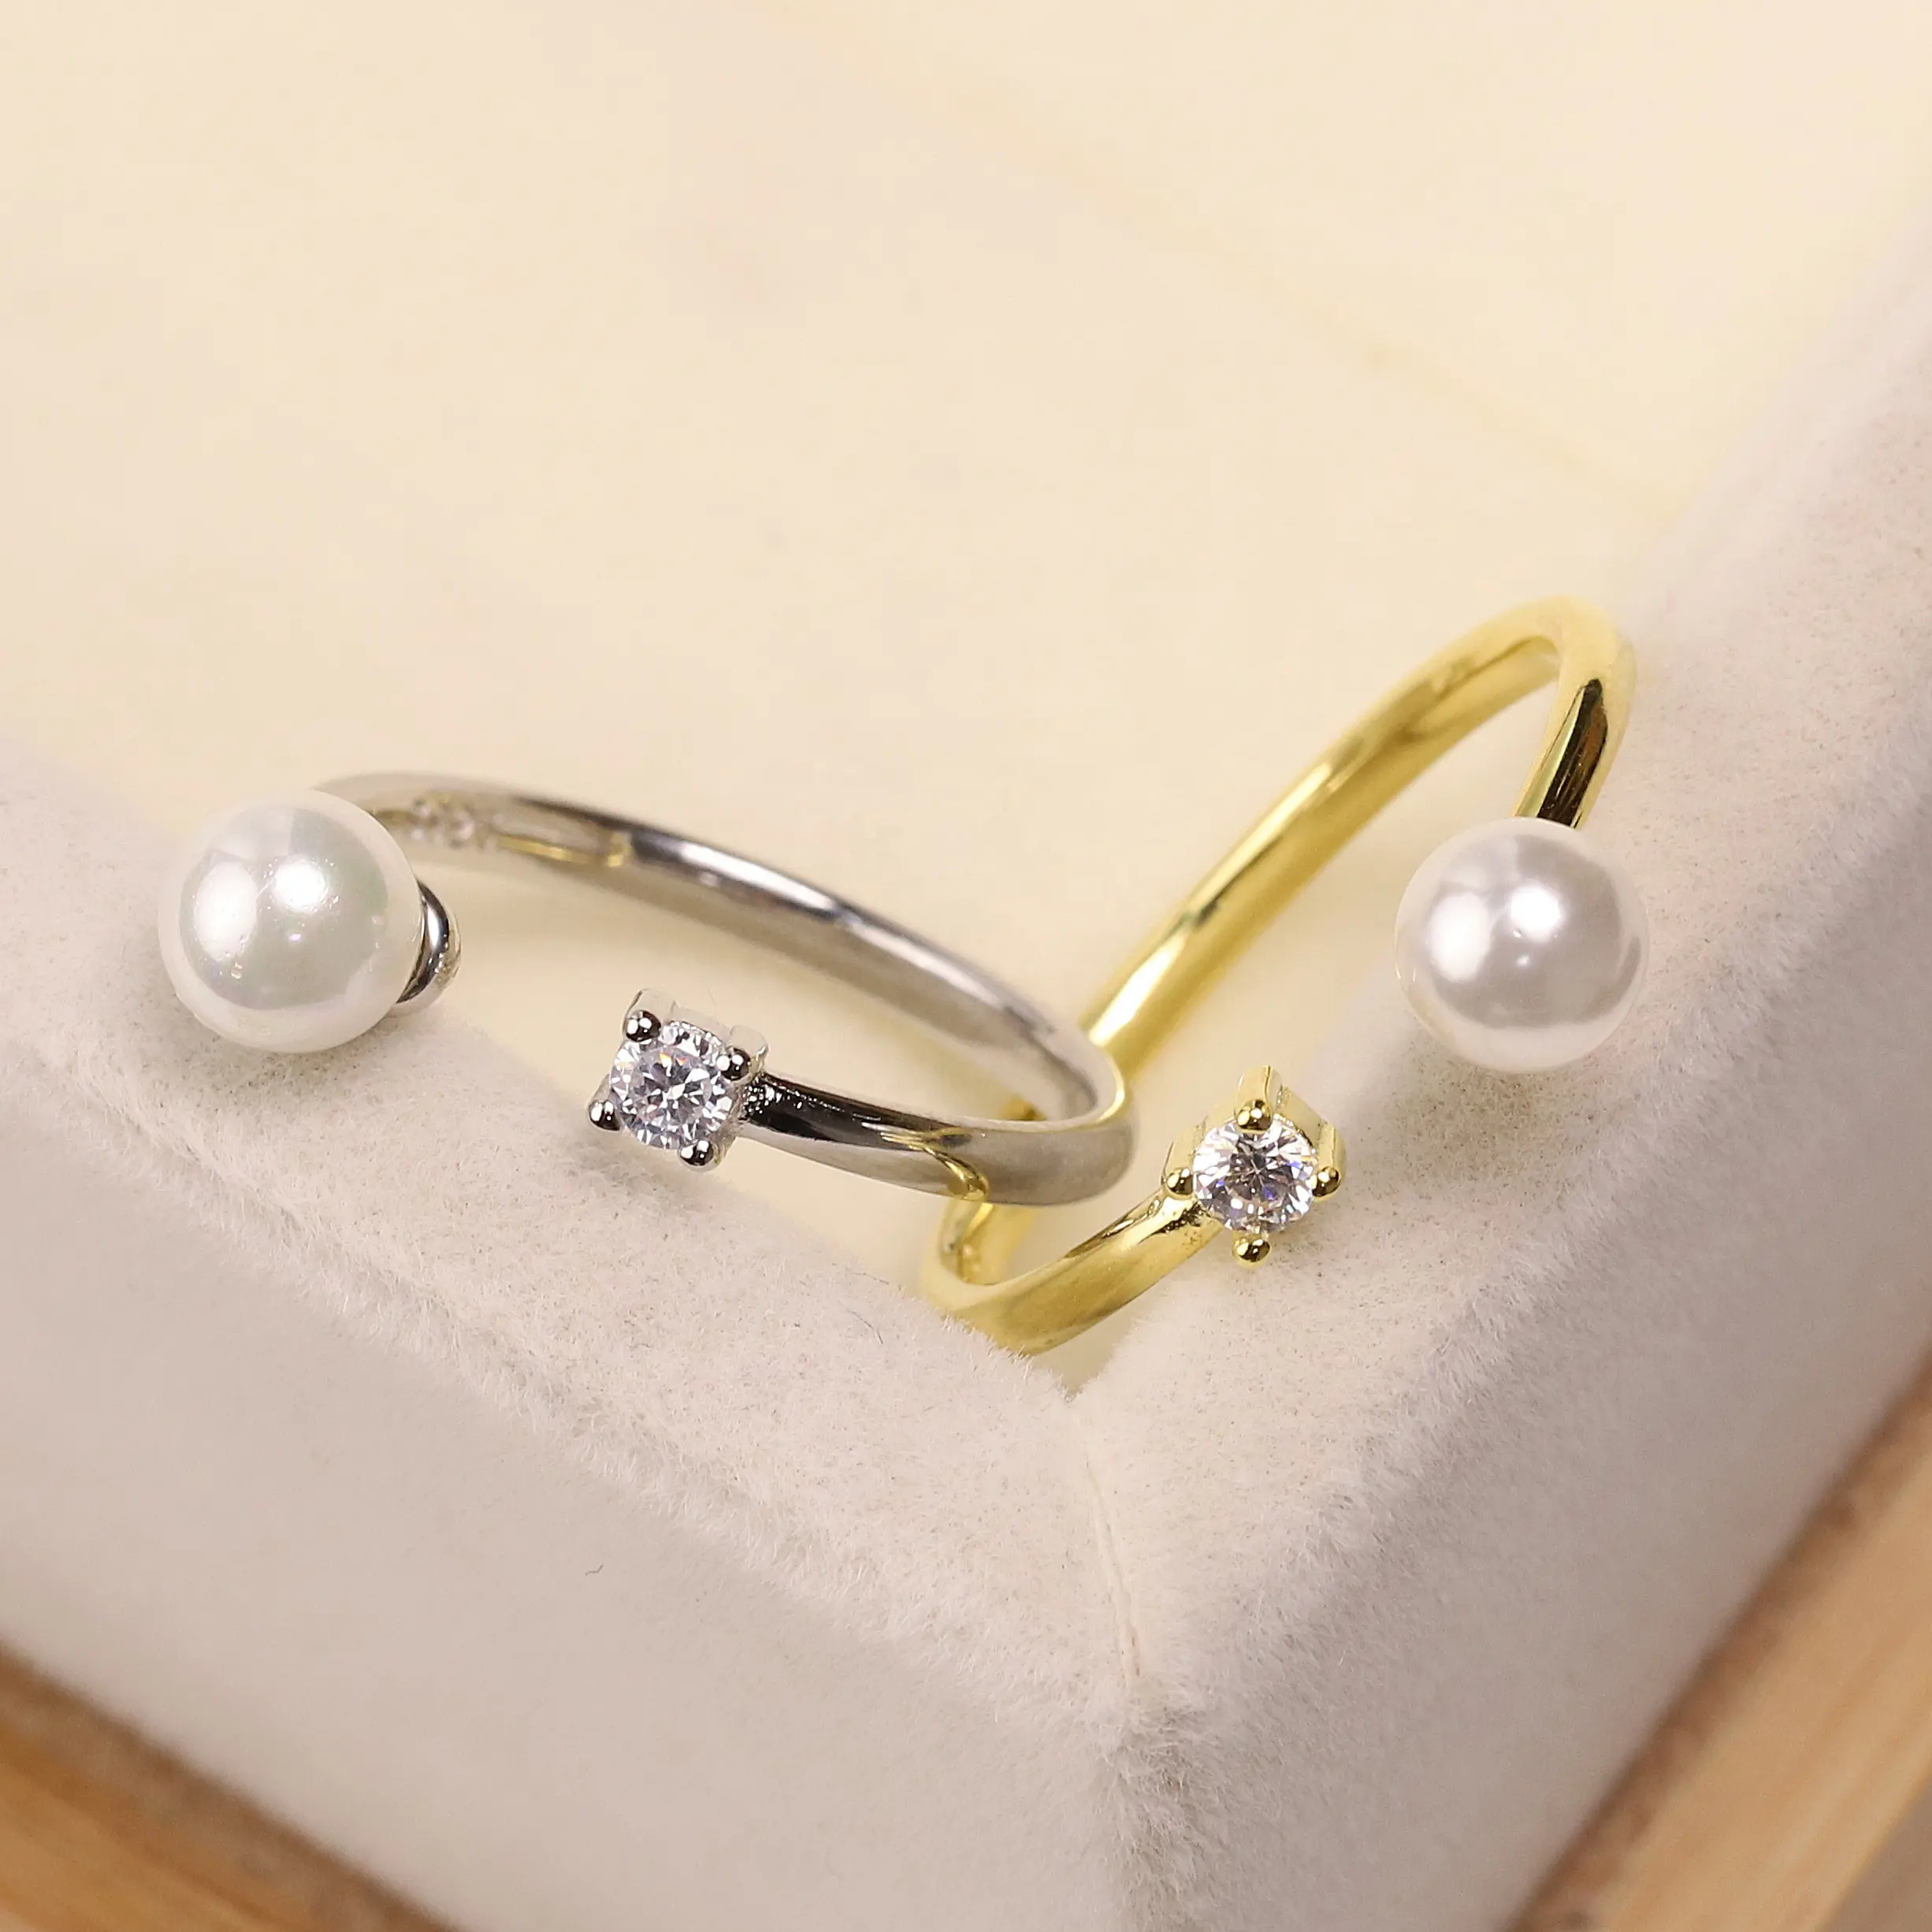 S925 Silver Freshwater Pearl Ring Female Open Ring Japanese And Korean Fashion Personality Wedding Niche Ring Romantic Gift